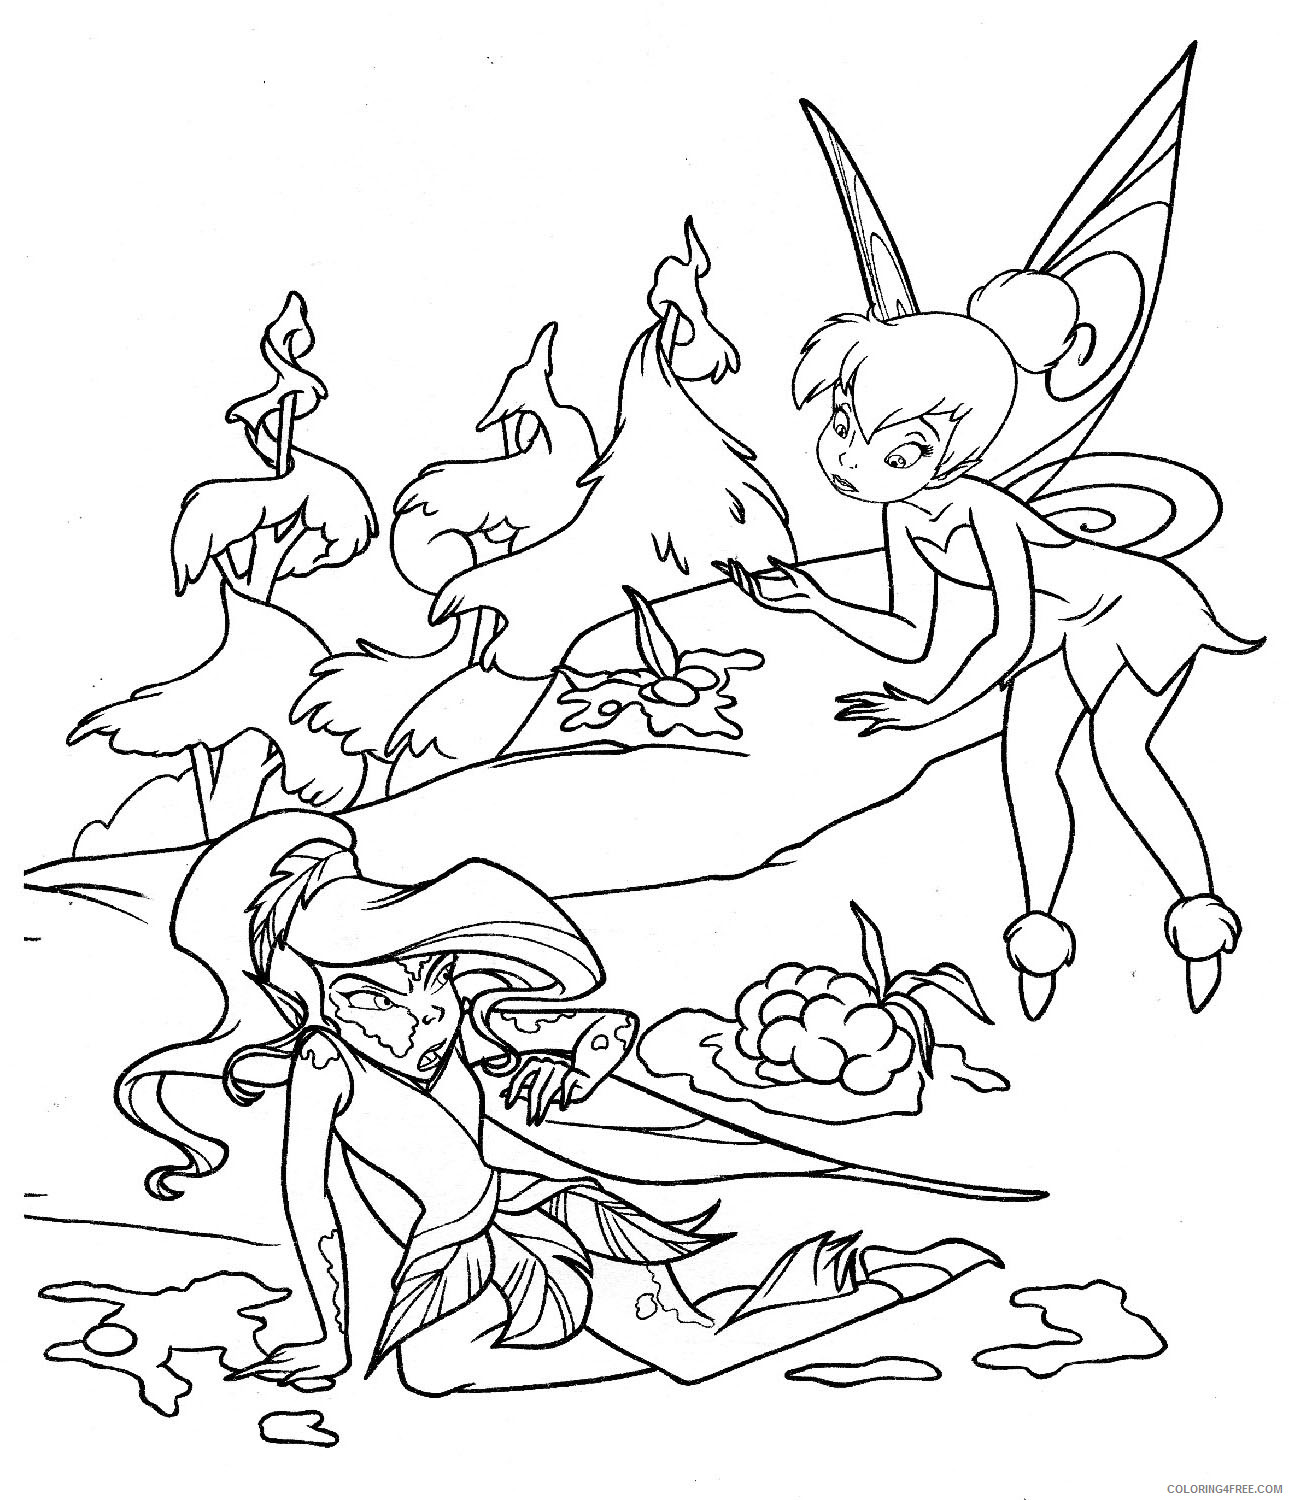 Tinker Bell Coloring Pages Cartoons Gothic Tinkerbell 2 Printable 2020 6605 Coloring4free